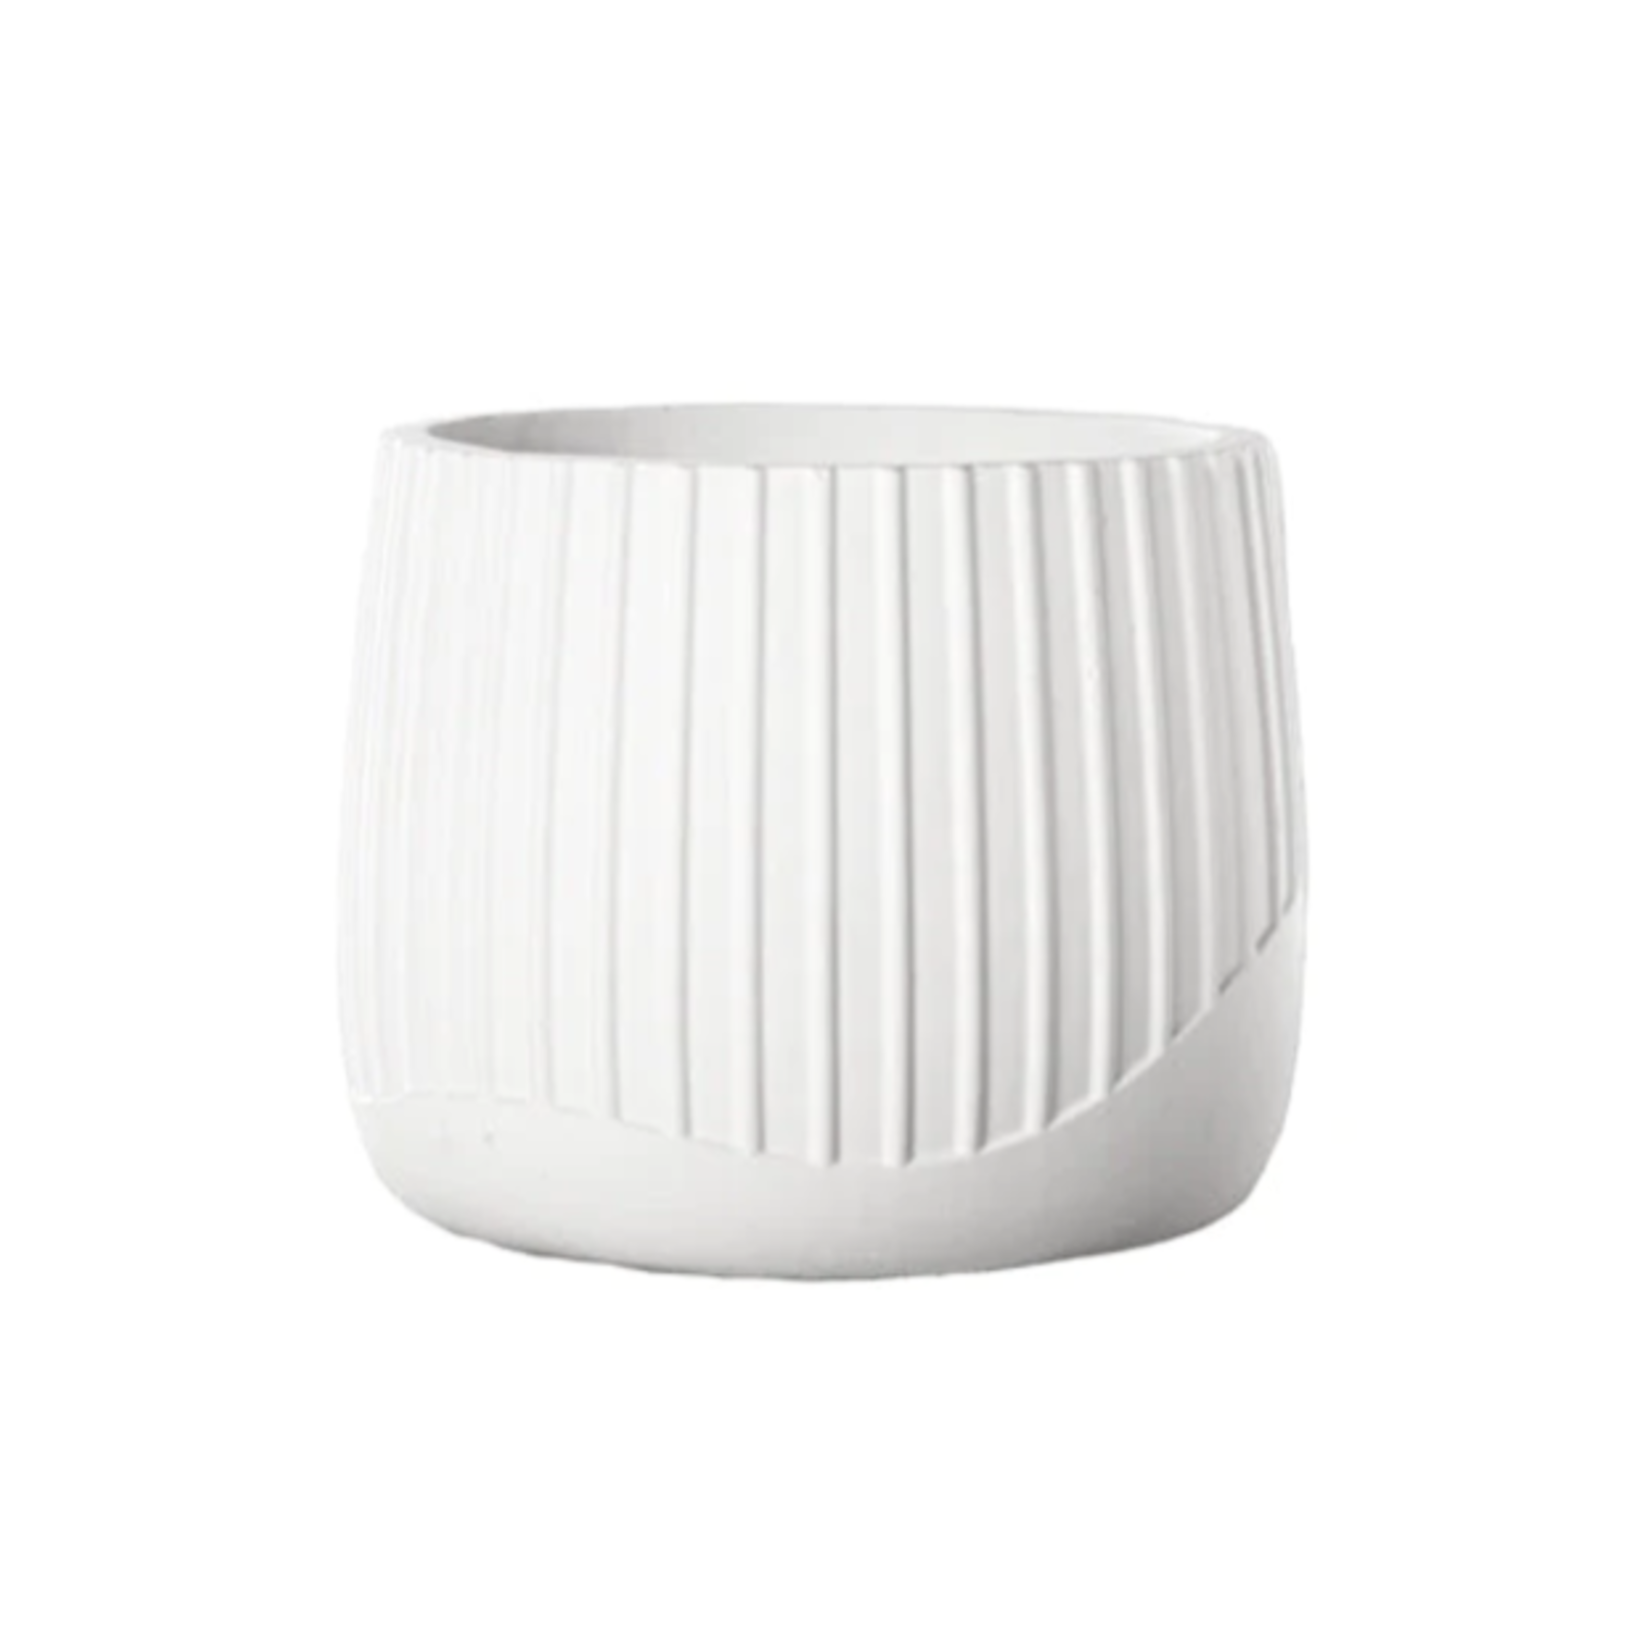 6.25”H X 7.5” CERAMIC Round Pot with Embossed Column Pattern and Banded Bottom Design